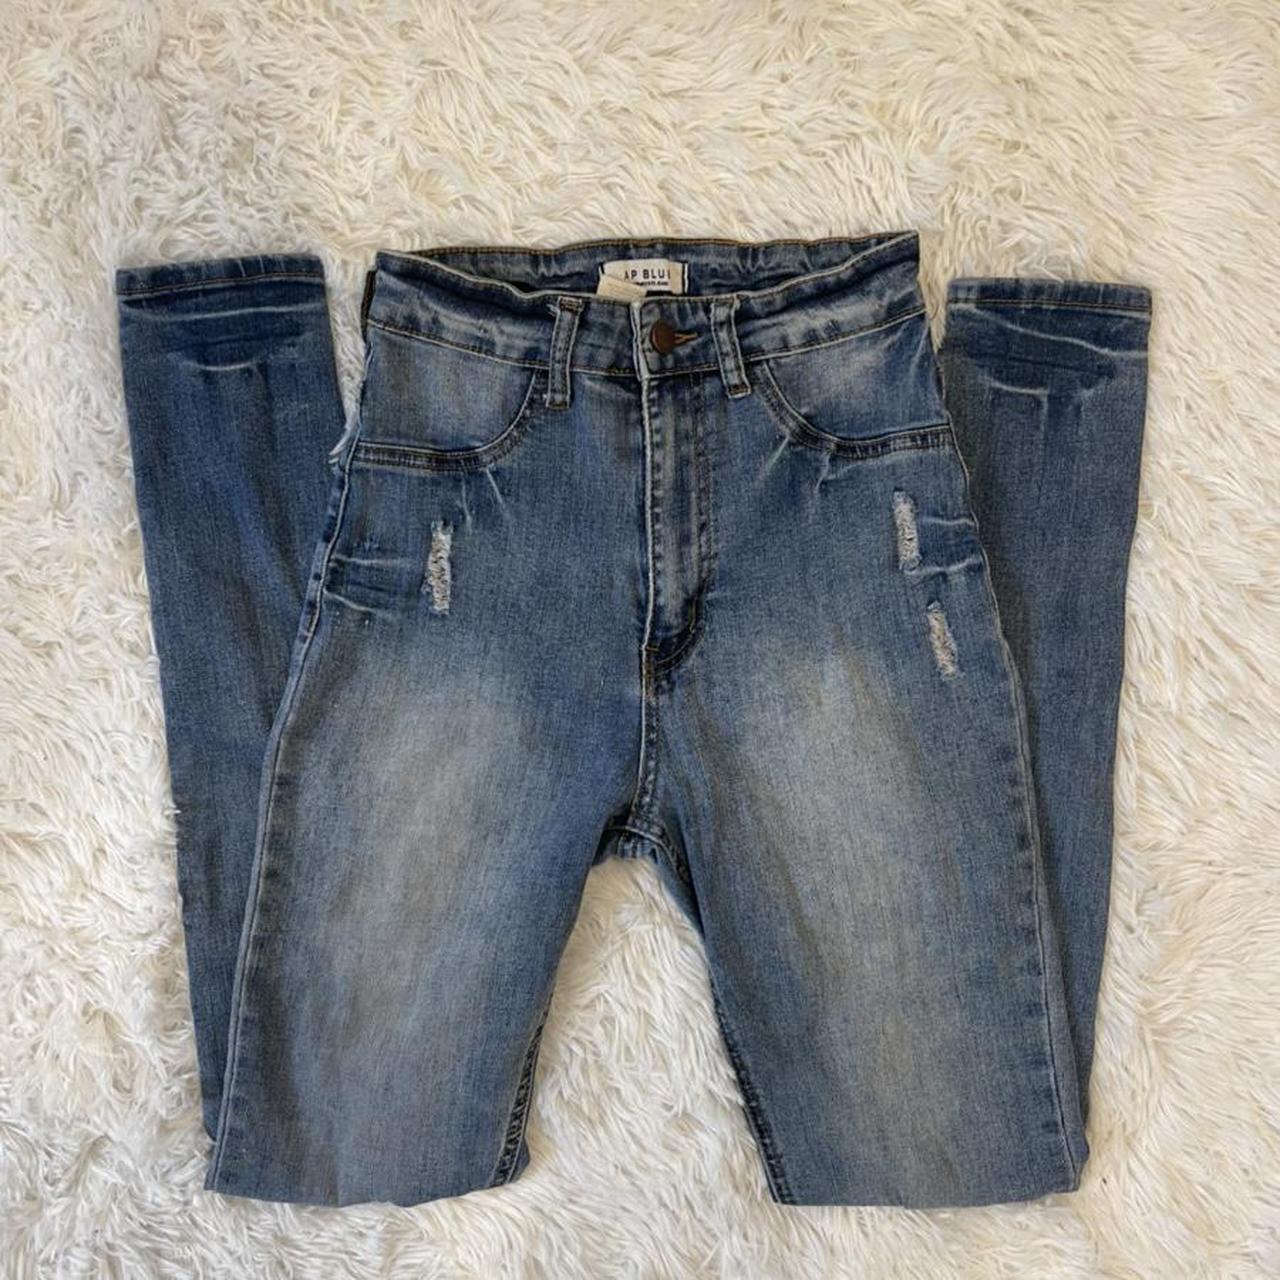 🤍 Preloved high waisted blue jeans from AP Blue. Has... - Depop